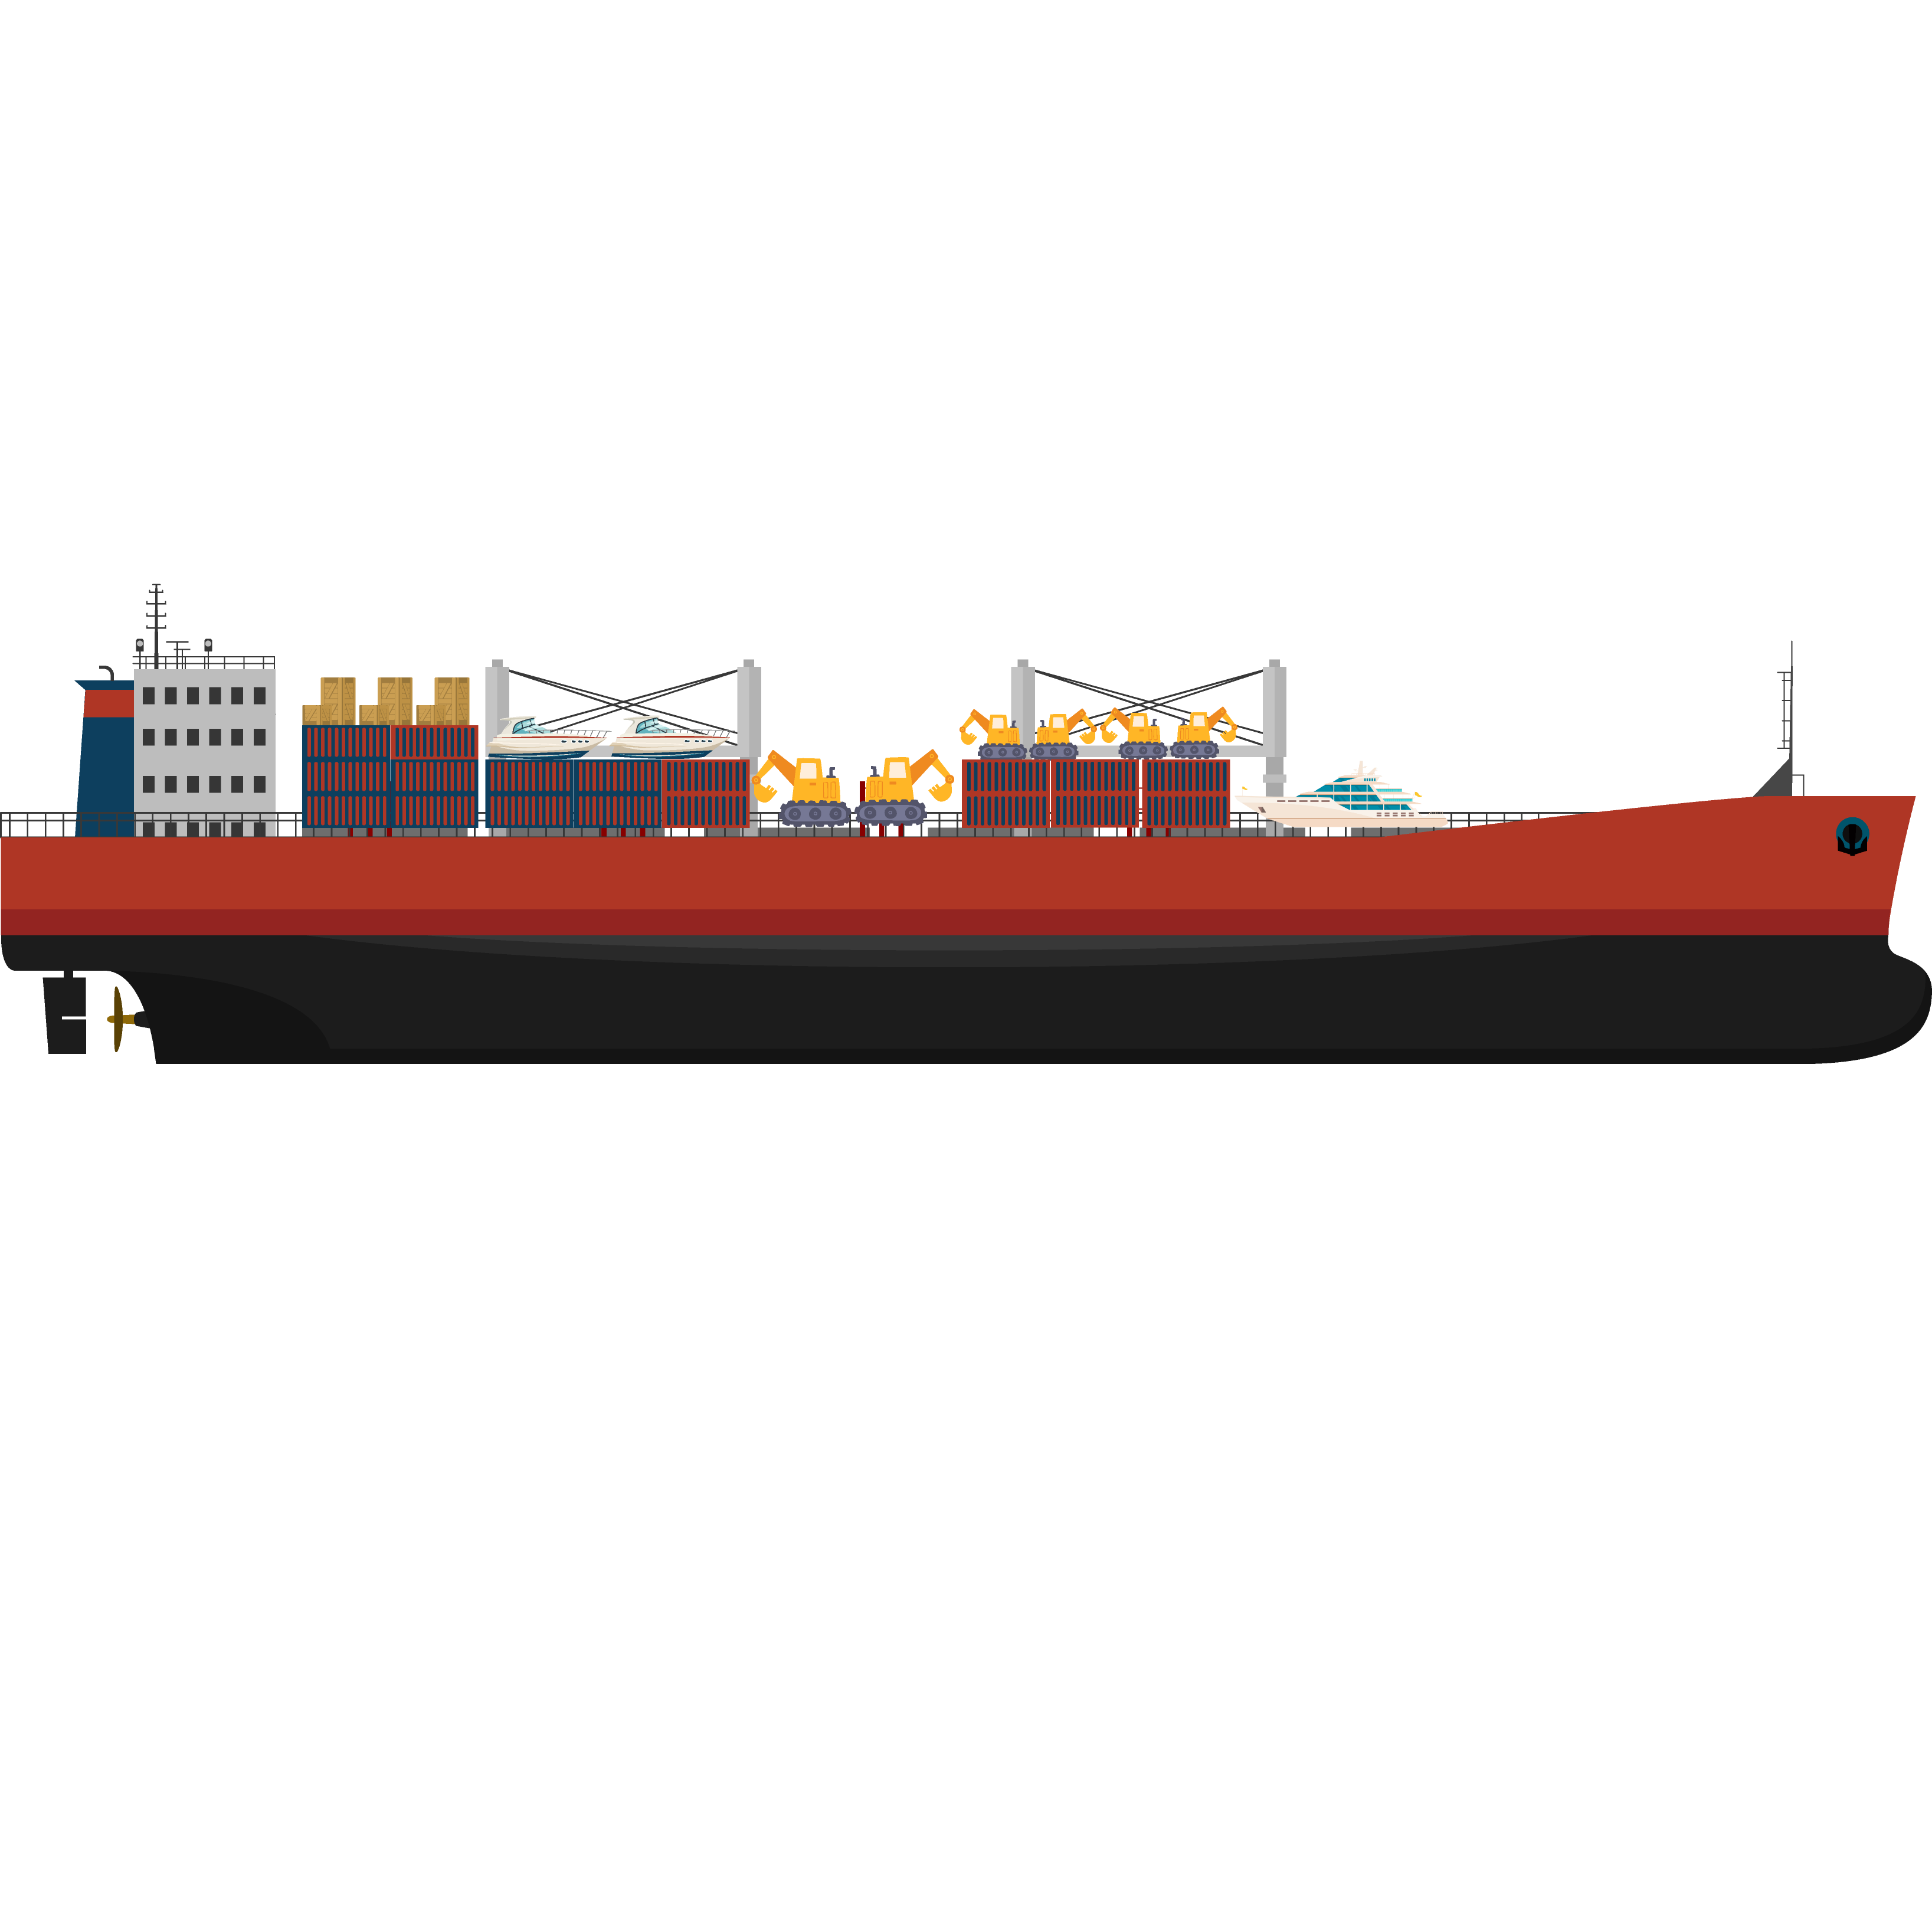 Illustration of a dry bulk vessel with on-deck cargo. The cargo is visible on the open deck of the ship, showcasing the concept of on-deck shipment for dry bulk goods. This illustration emphasizes the practice of loading cargo directly onto the vessel's deck instead of within its enclosed holds, highlighting the efficiency and convenience of on-deck shipments in maritime transport.